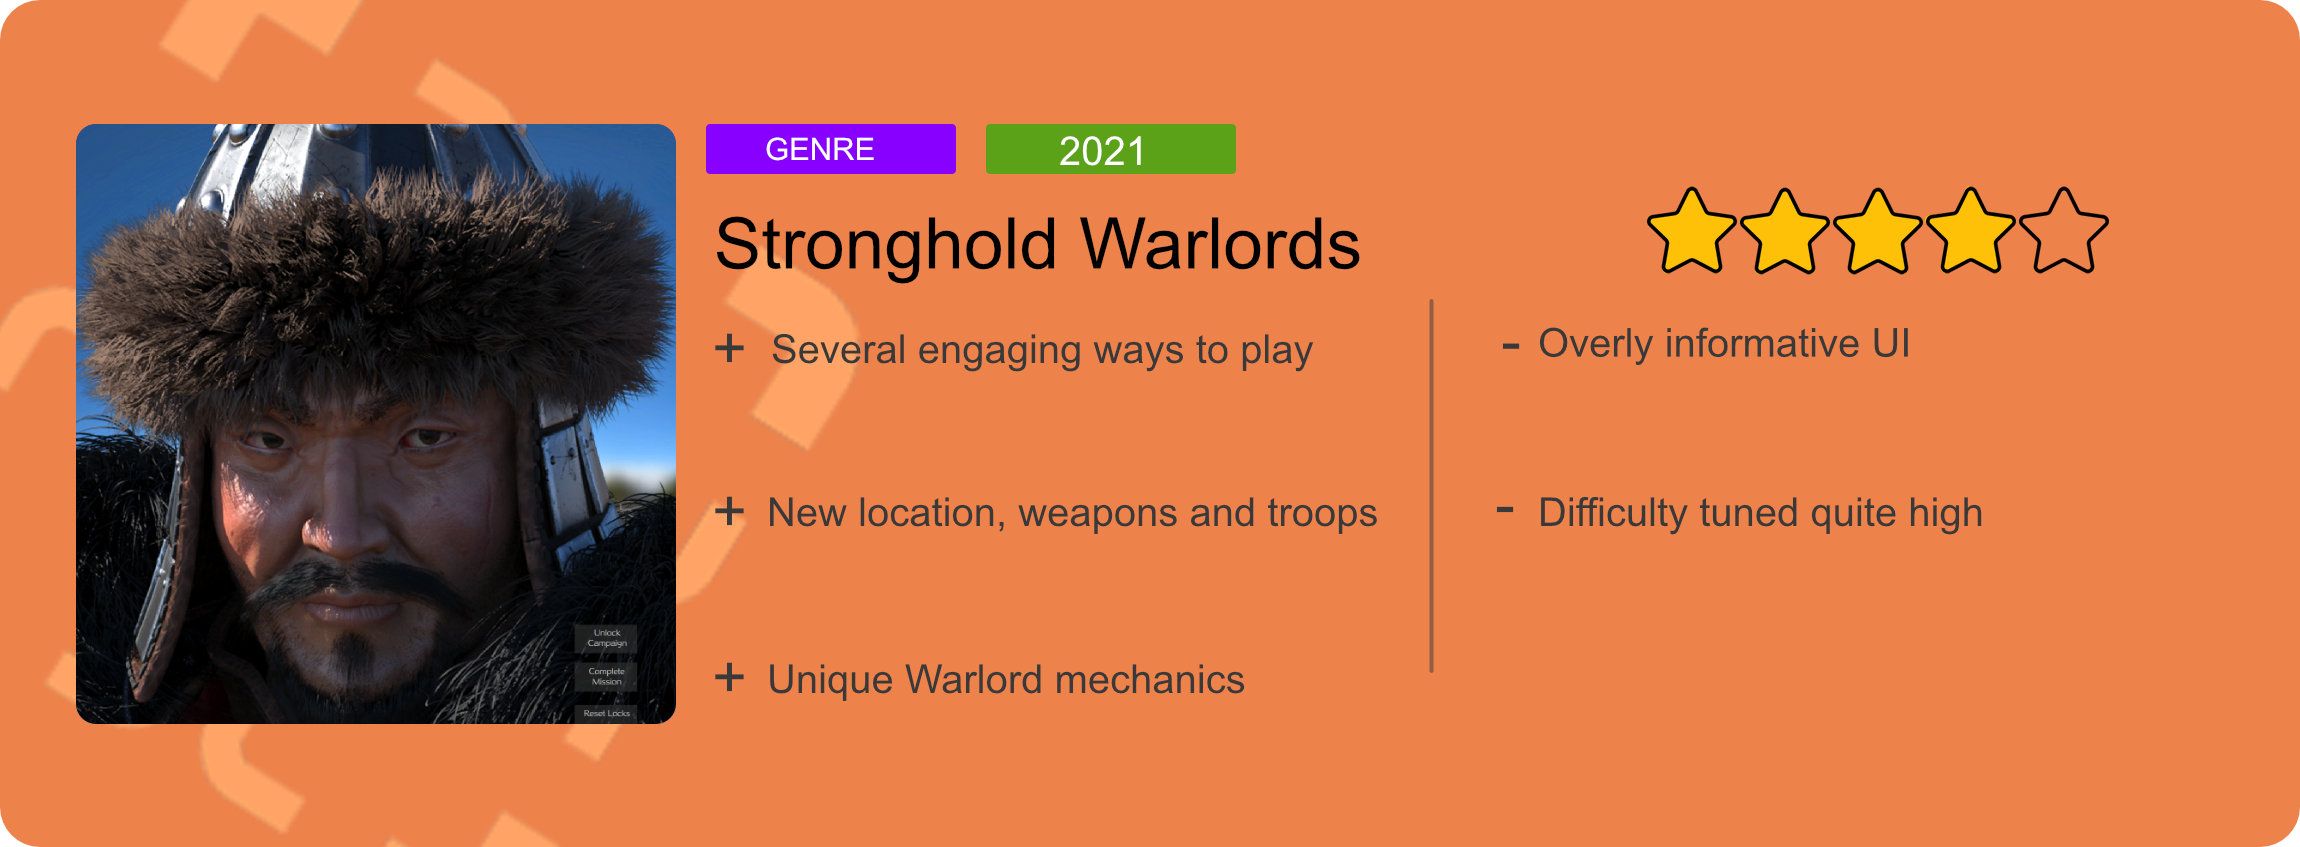 TG Rating banner. Reads: Pros, several engaging ways to play, new location, weapons and troops, unique warlord mechanics. Cons - overly informative UI, difficulty tuned quite high. Score is 4 out of 5.